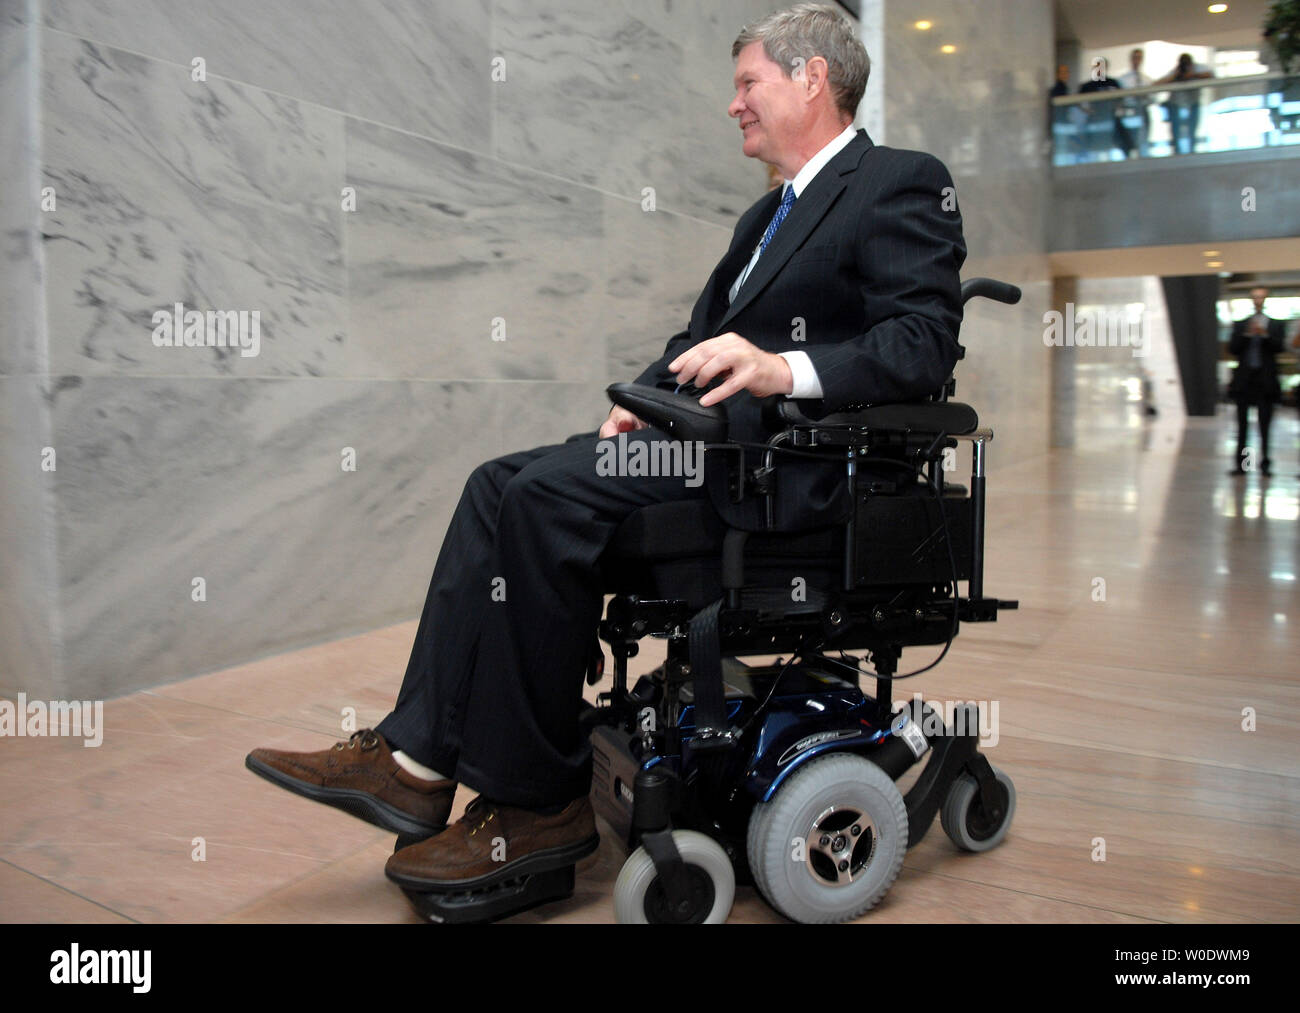 Sen. Tim Johnson (D-SD) makes his way to his office on Capitol Hill in Washington on September 5, 2007. The Senator has been out of office since suffering a brain hemorrhage at the end of last year. (UPI Photo/Kevin Dietsch) Stock Photo